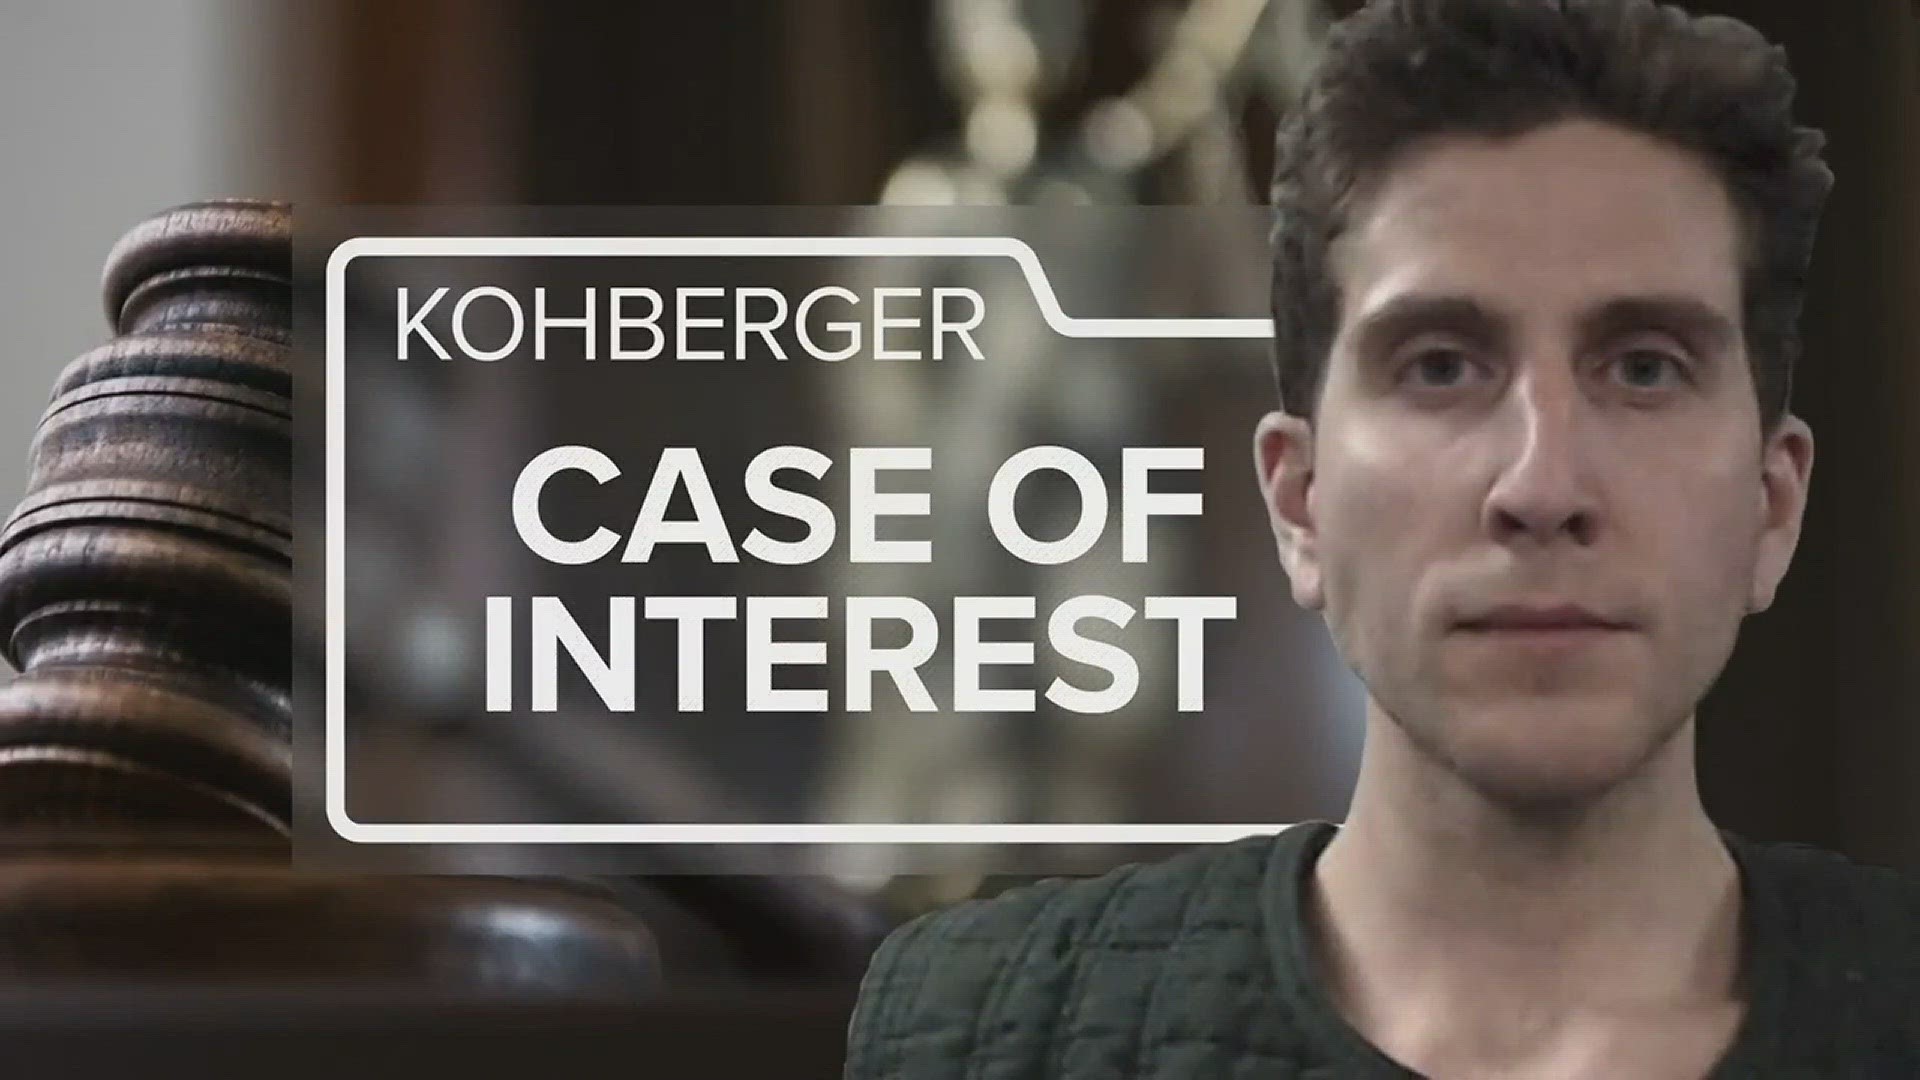 In today's episode of Case of Interest: Kohberger, we're diving into what could be good news for Kohberger's defense.